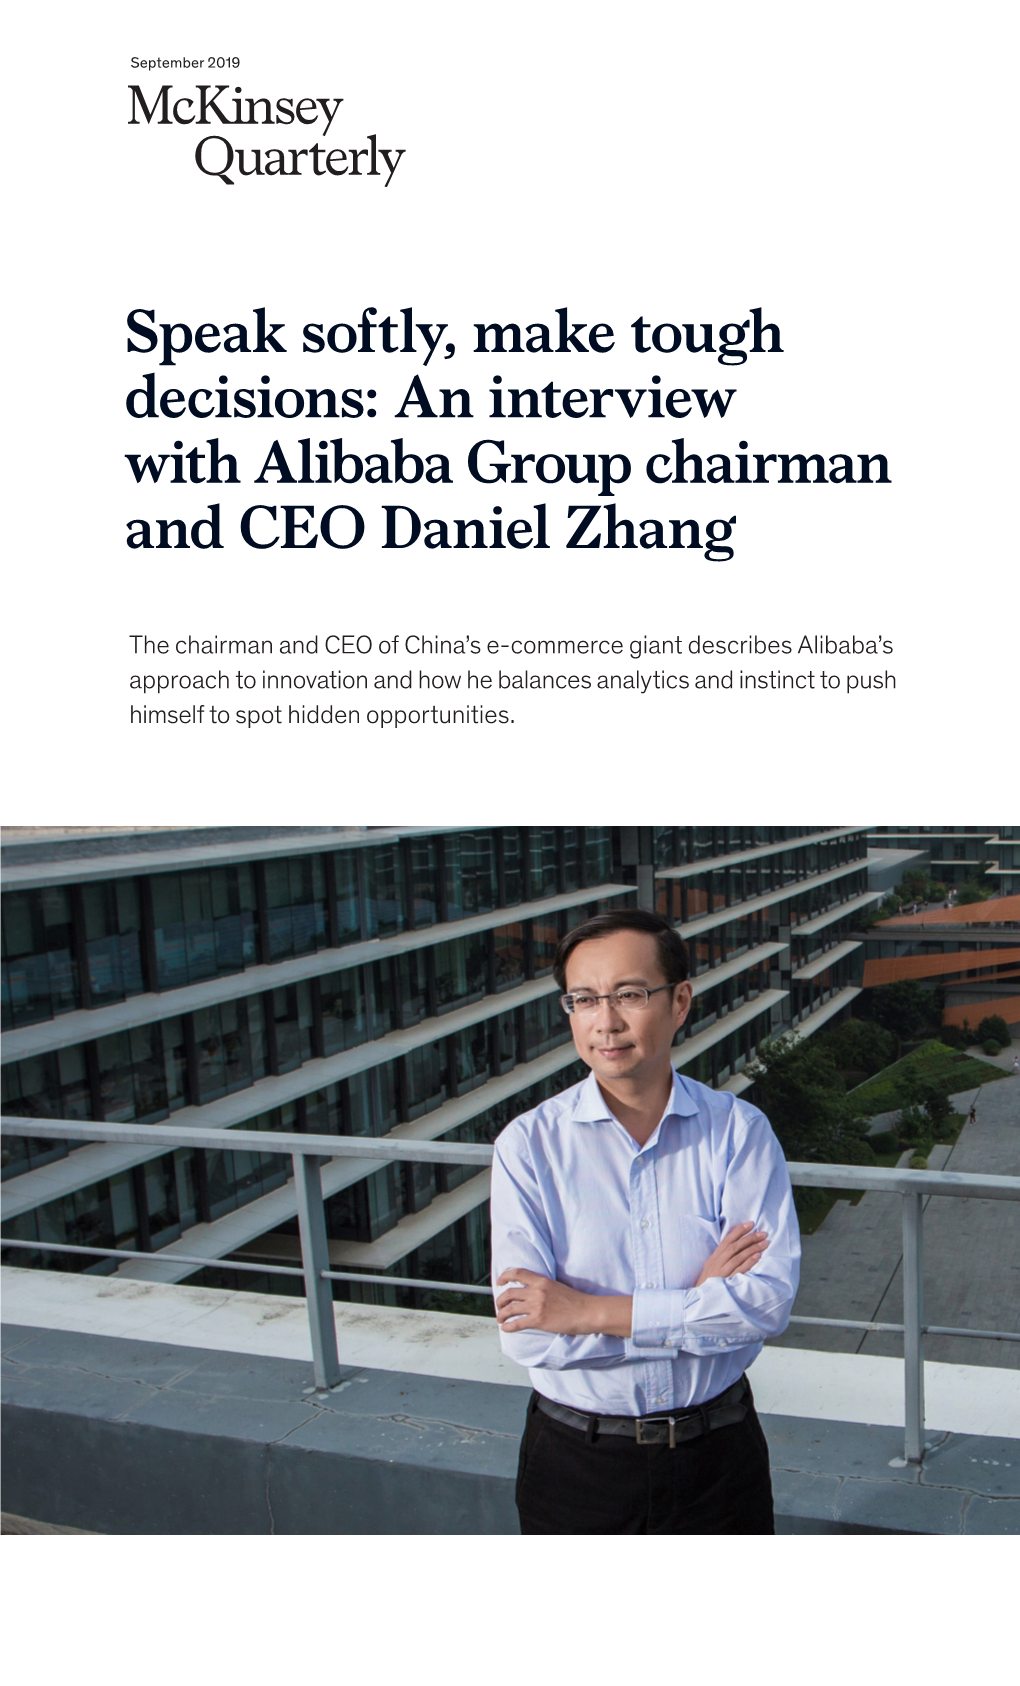 An Interview with Alibaba Group Chairman and CEO Daniel Zhang